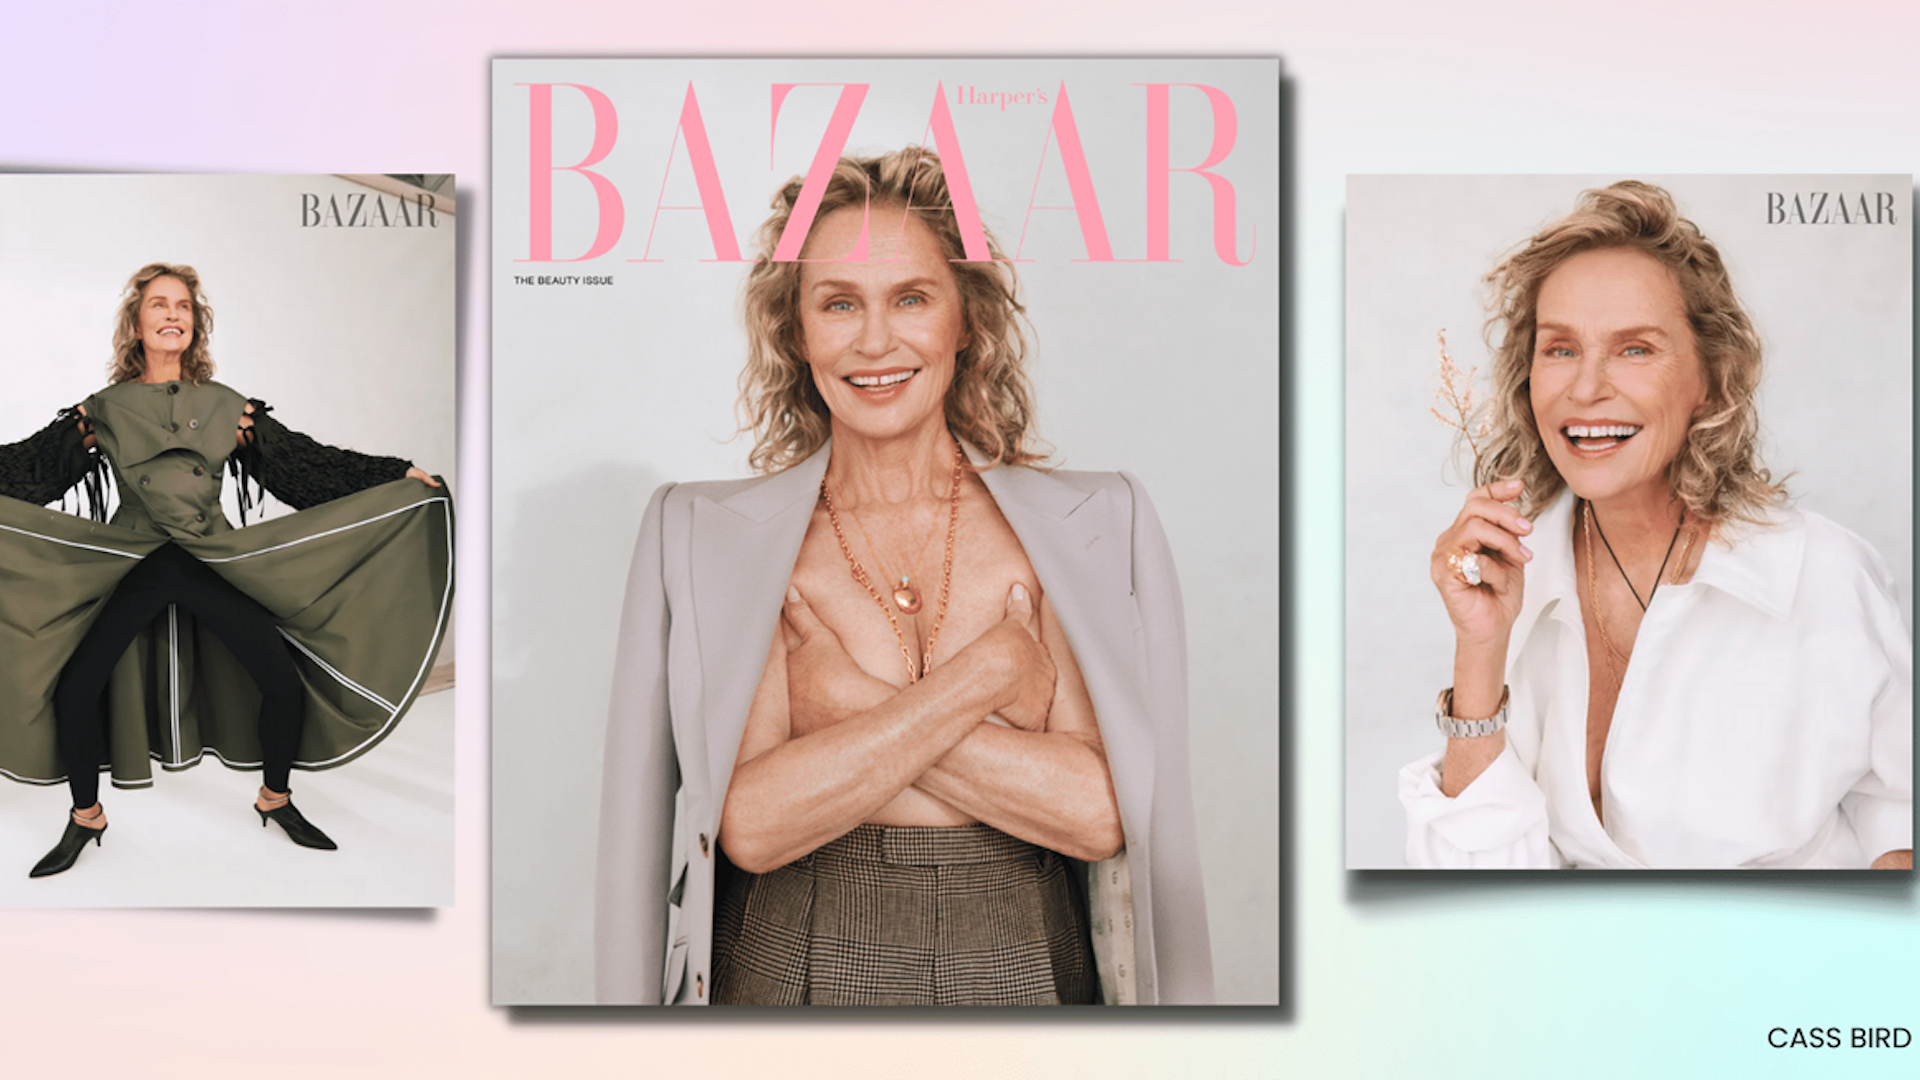 Model Lauren Hutton Continues to Chart Her Own Course at 78 by Being Unapologetically Herself